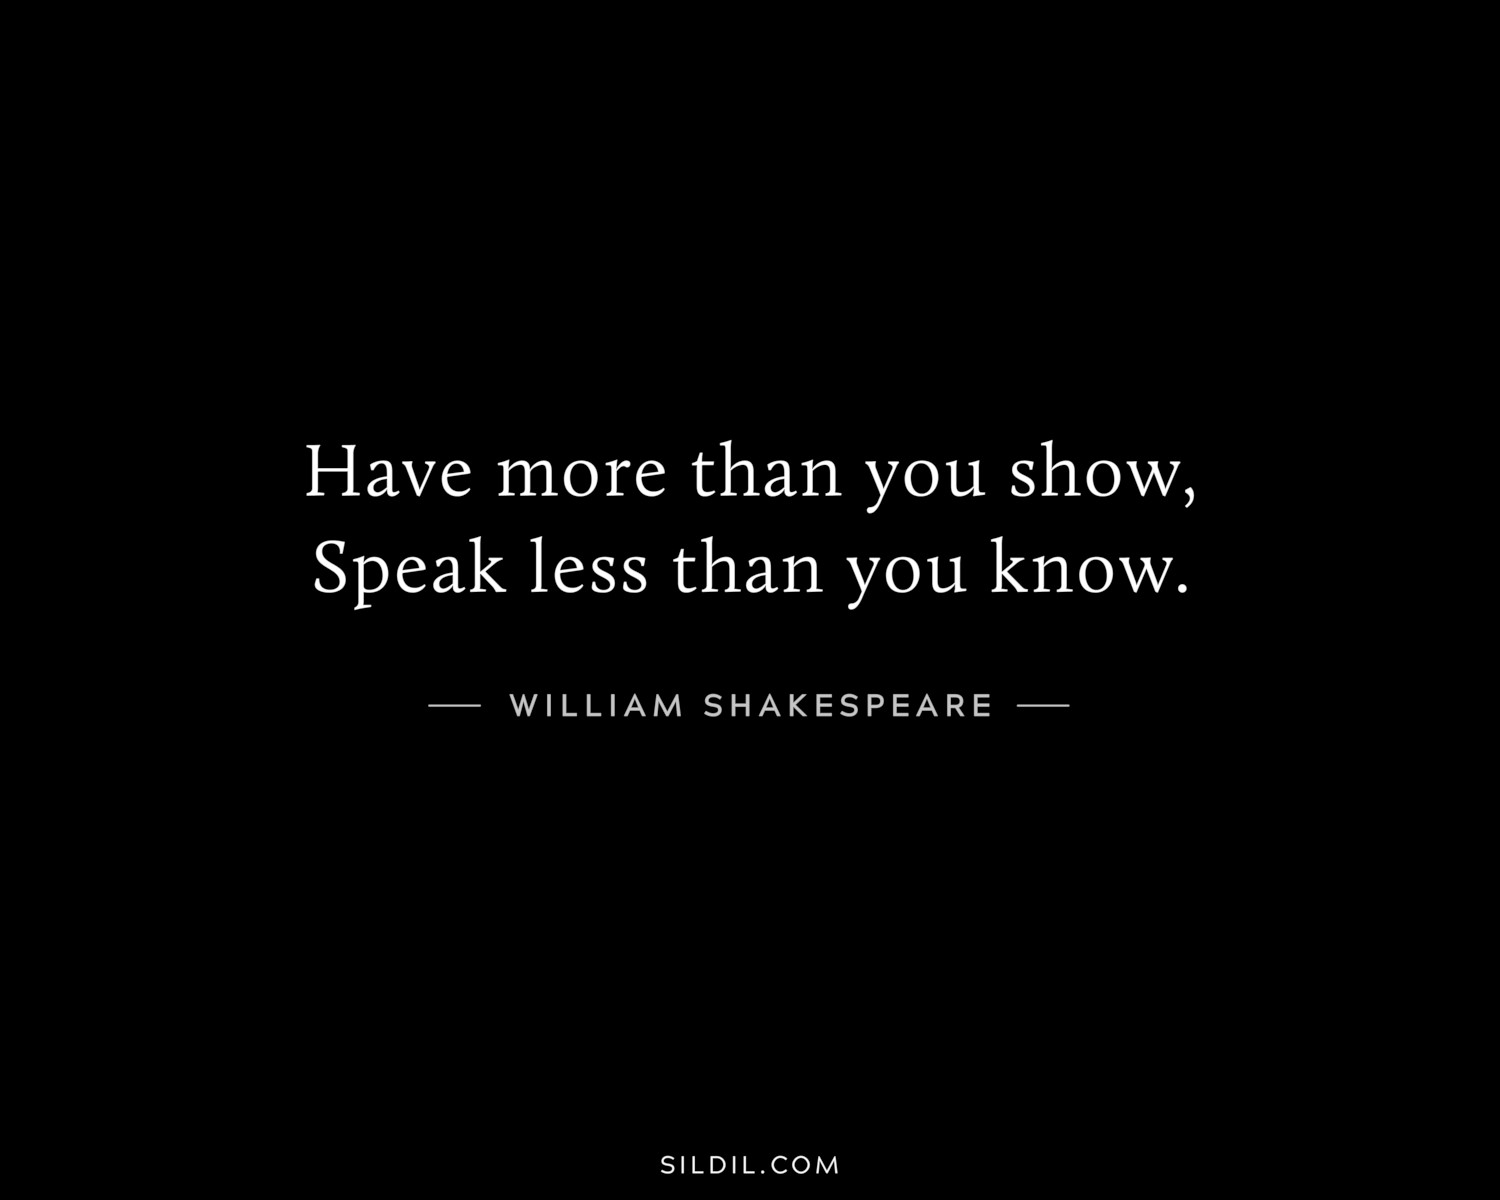 Have more than you show, Speak less than you know.